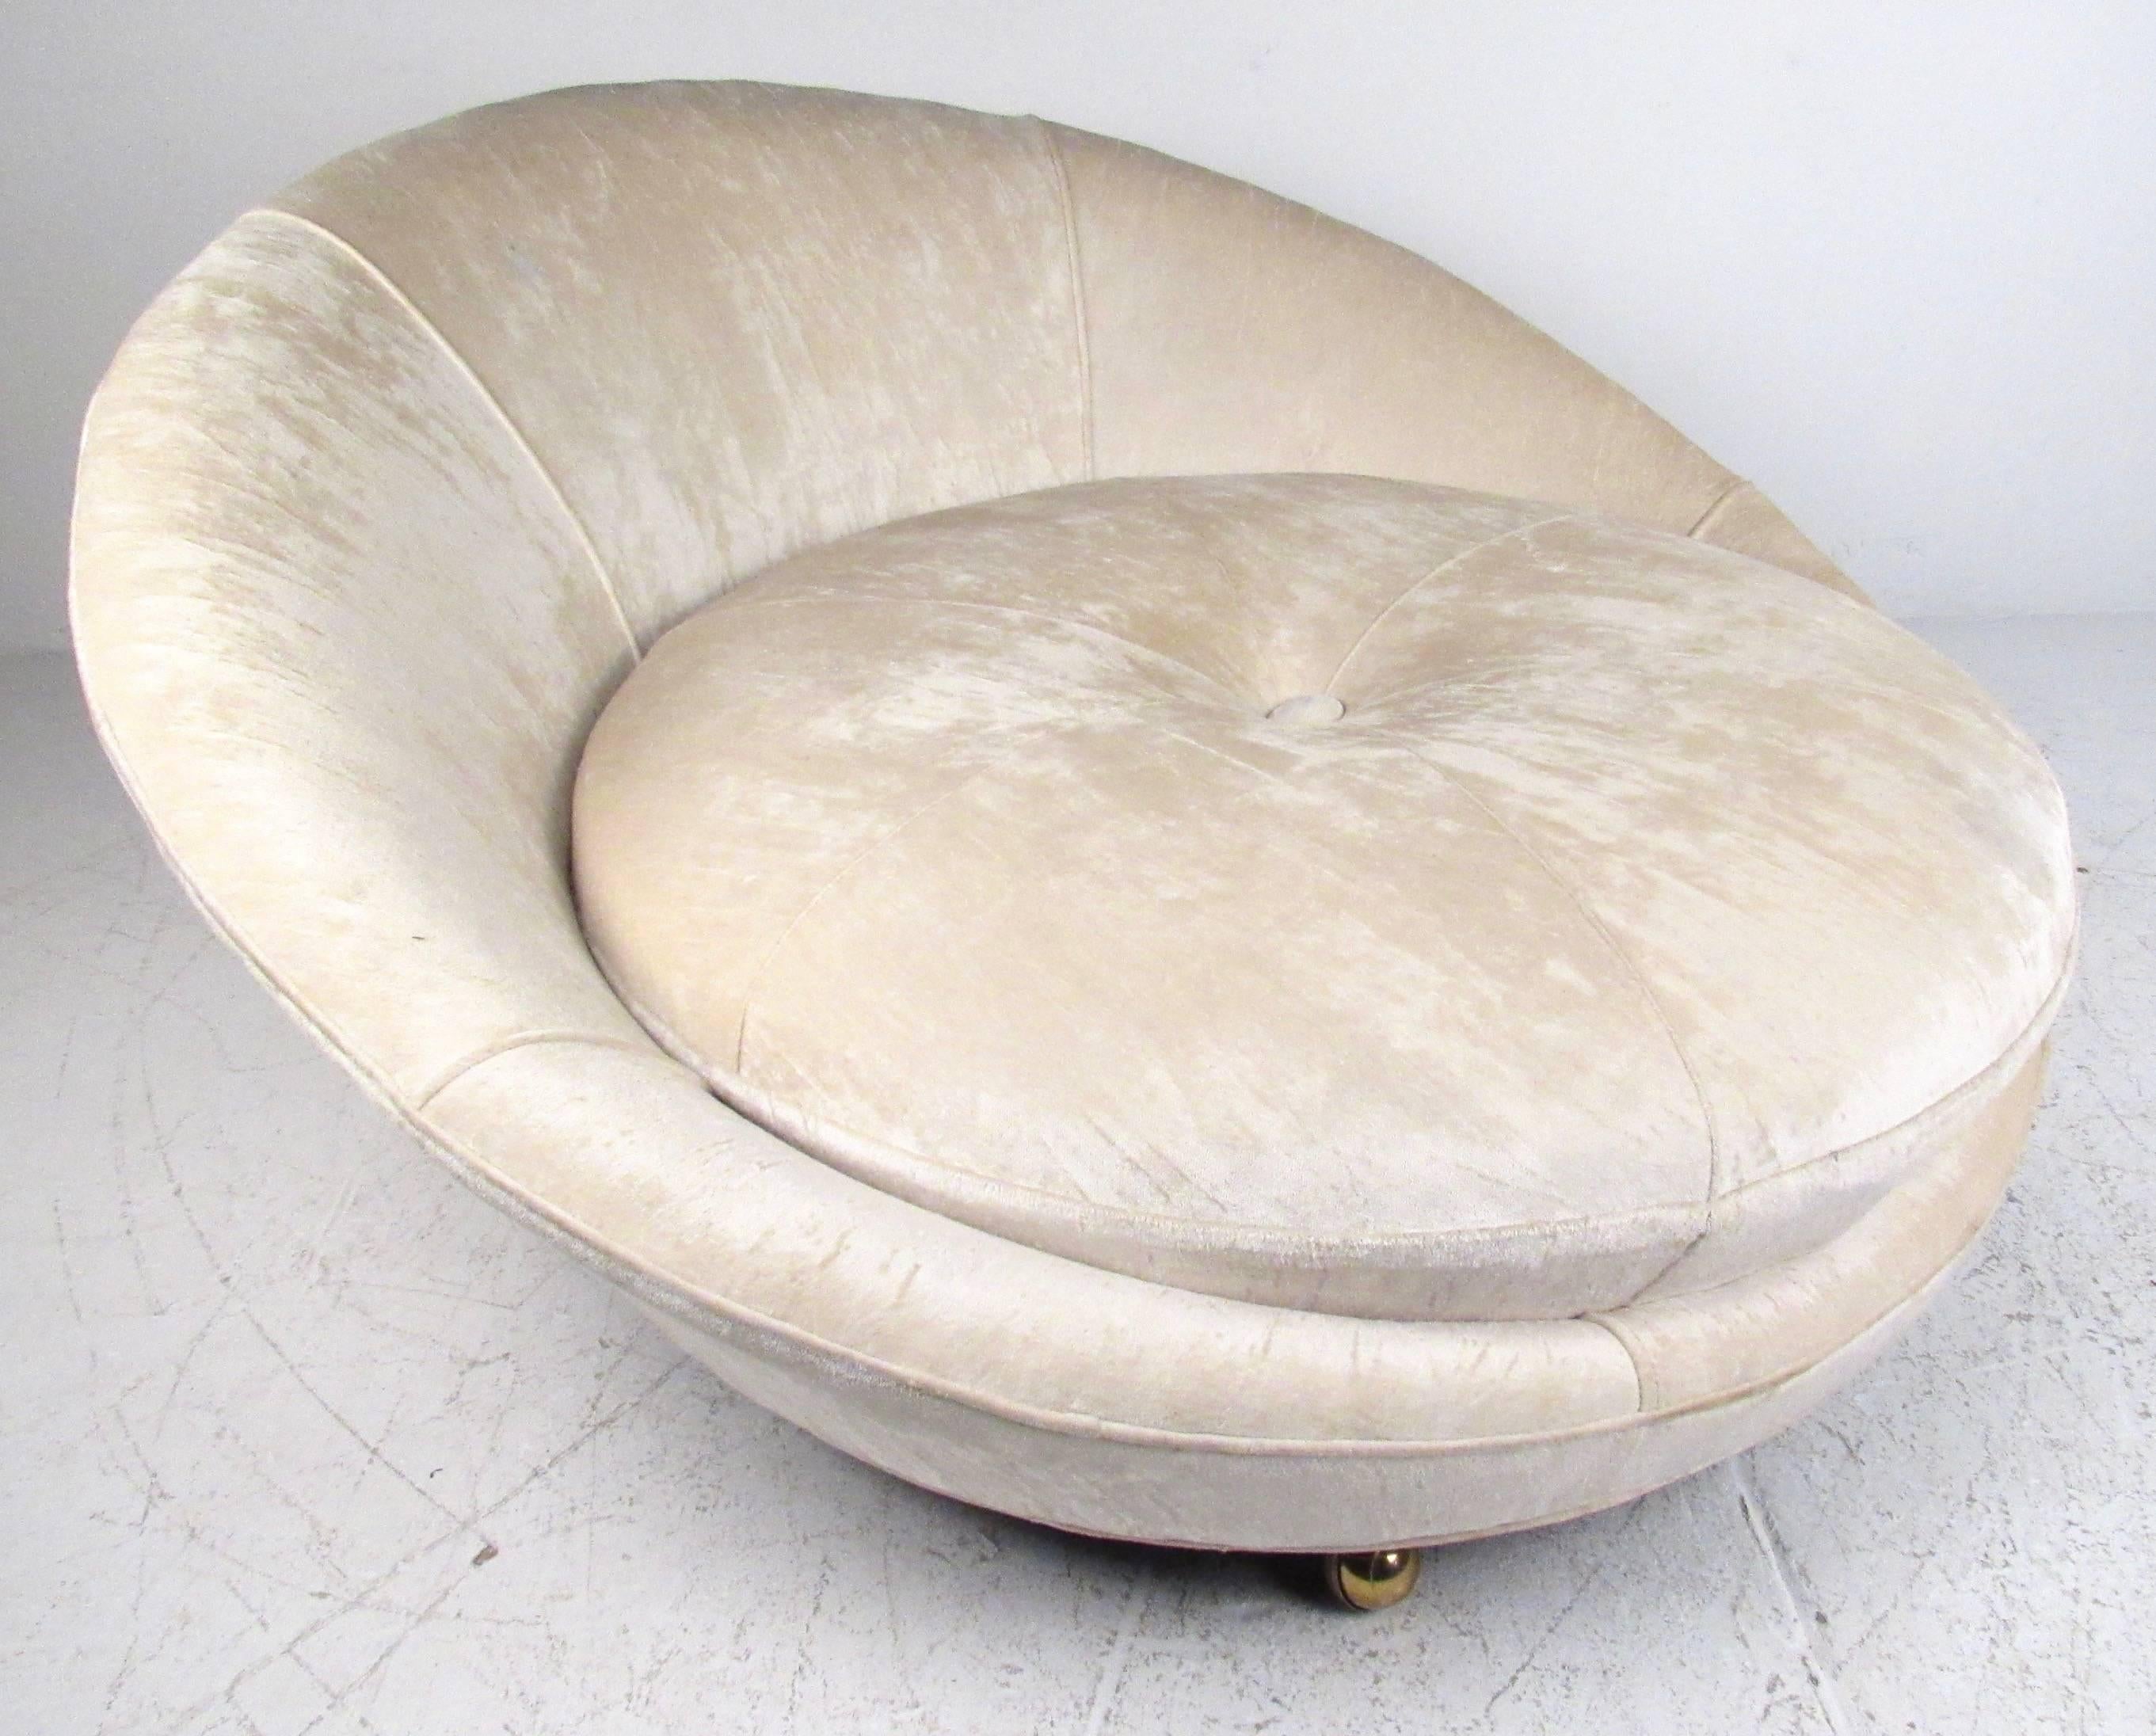 This large disc shaped lounge chair features plush tufted velvet upholstery, the perfect covering for this modernistic Milo Baughman designed chair. Oversized seat makes for a comfortable addition to any seating area and features brass casters for